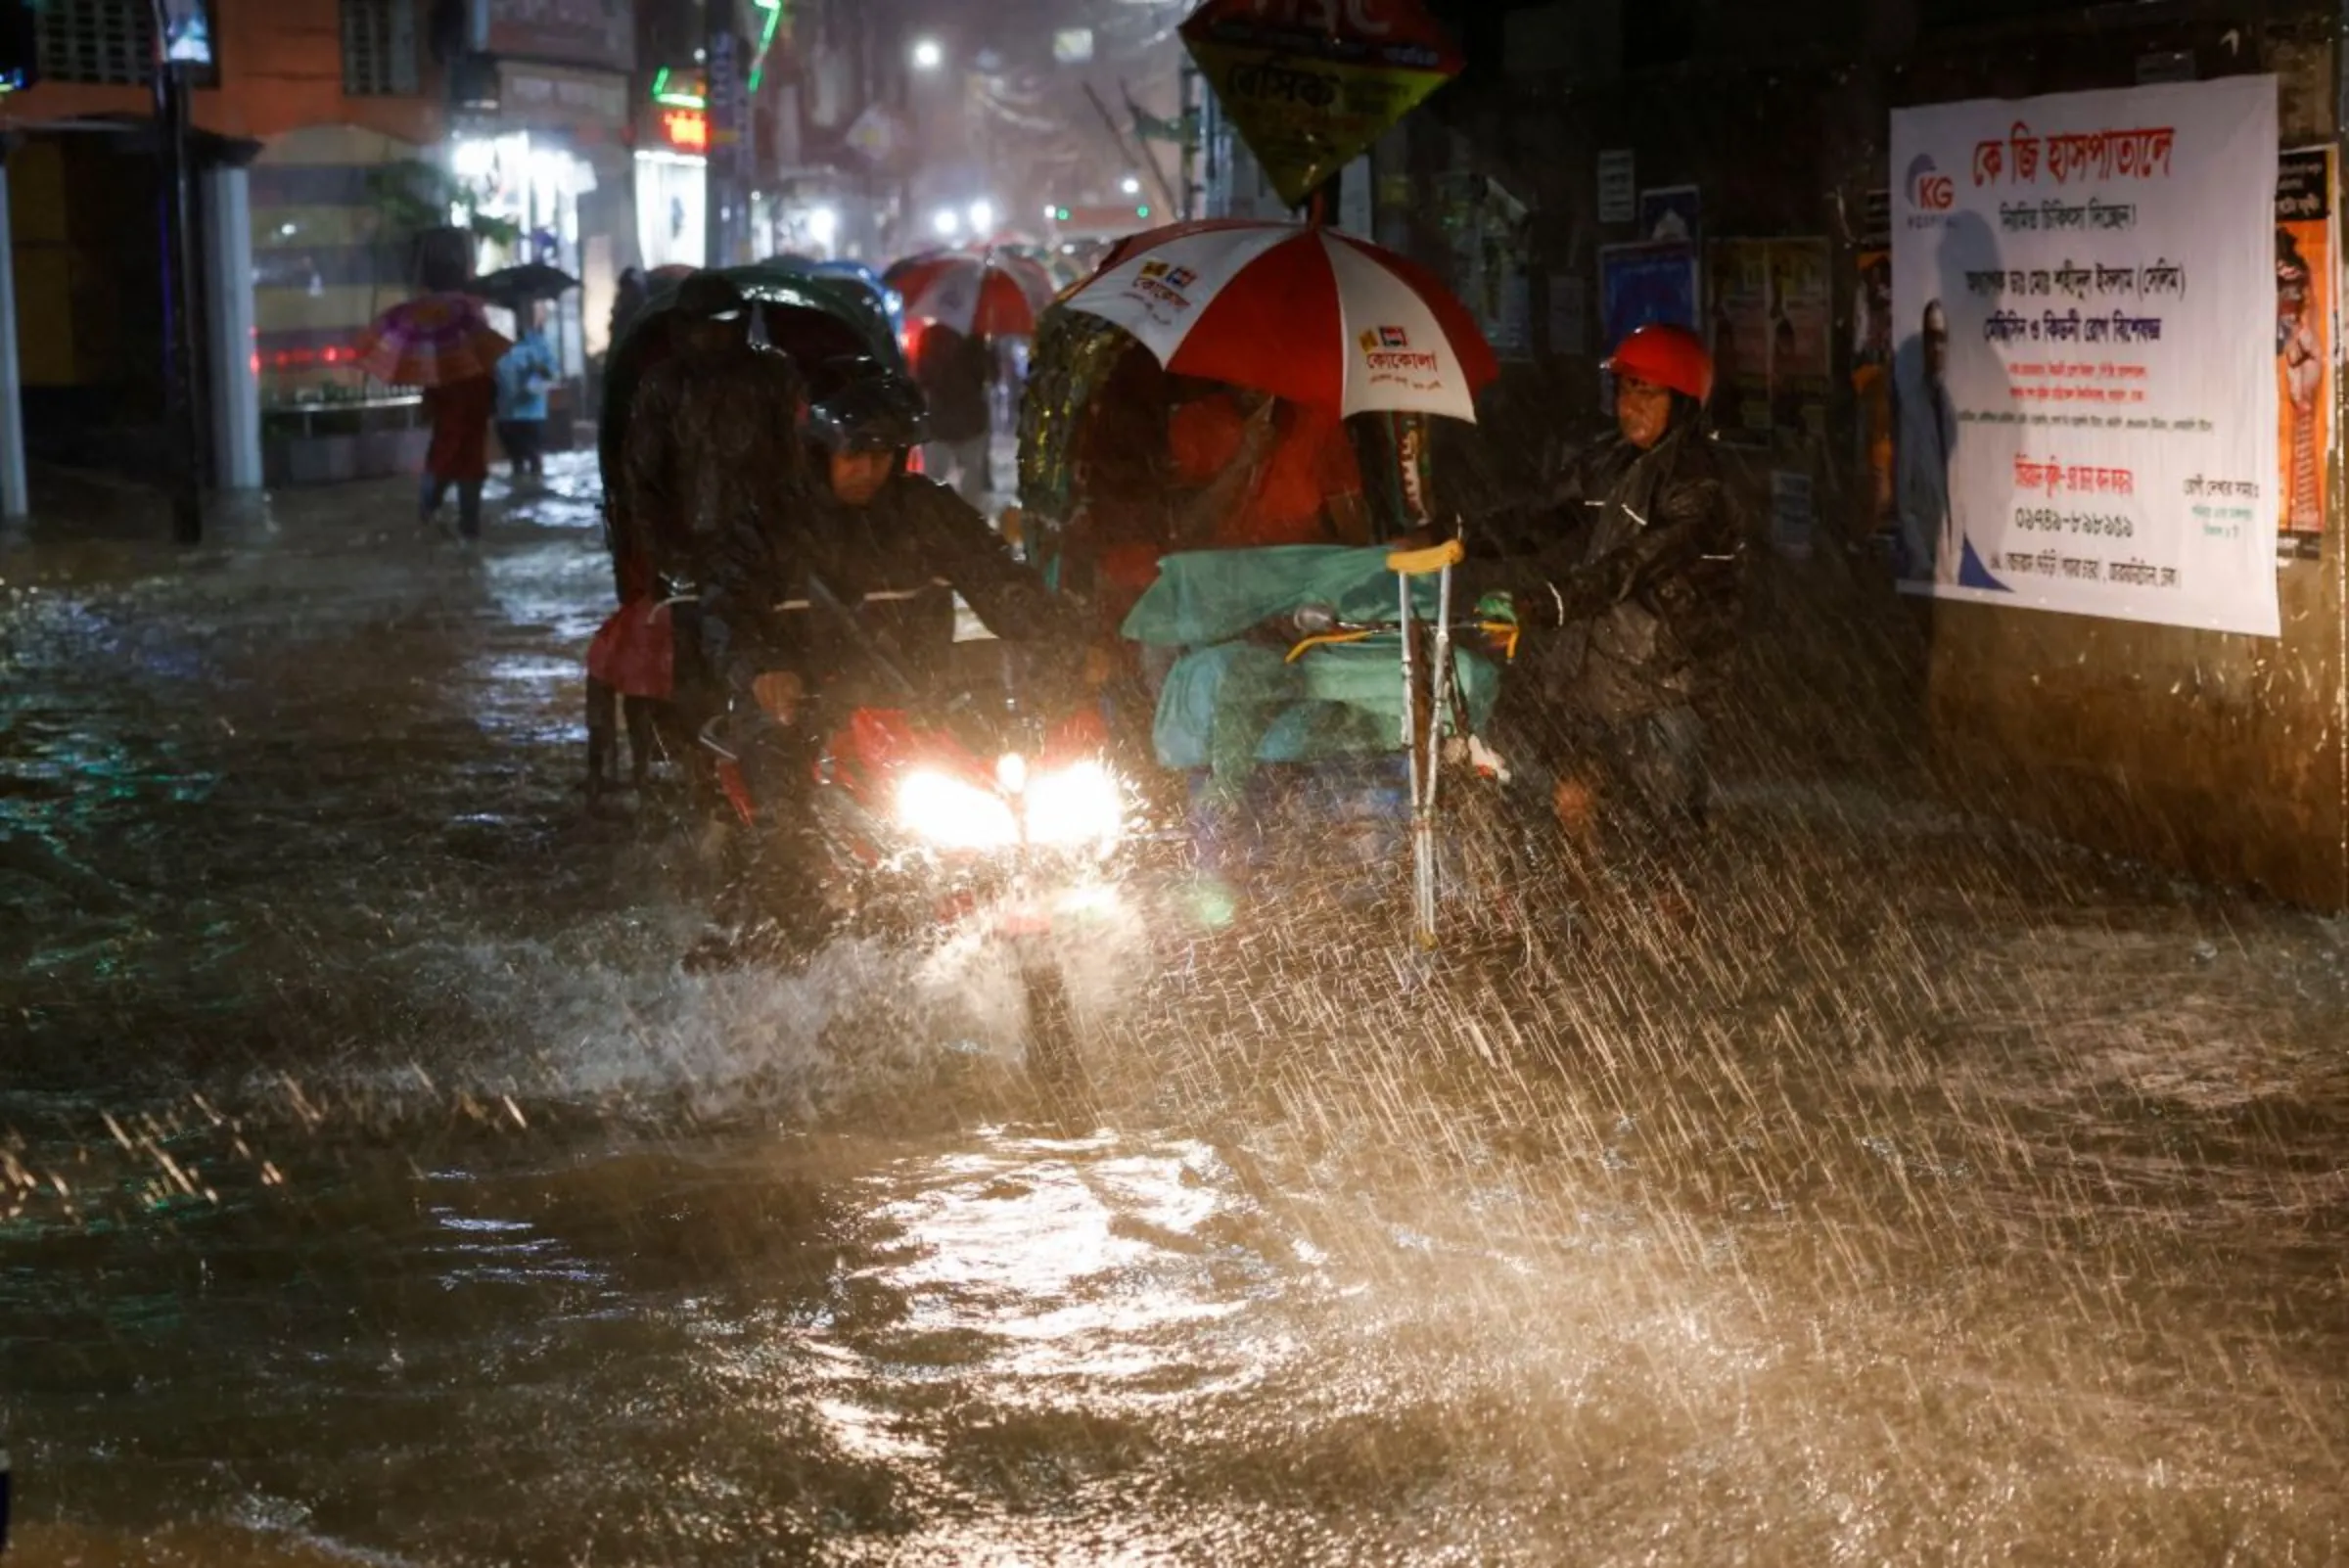 People ride rickshaws and motorcycle on a flooded street, amid continuous rain before the Cyclone Sitrang hits the country in Dhaka, Bangladesh, October 24, 2022. REUTERS/Mohammad Ponir Hossain